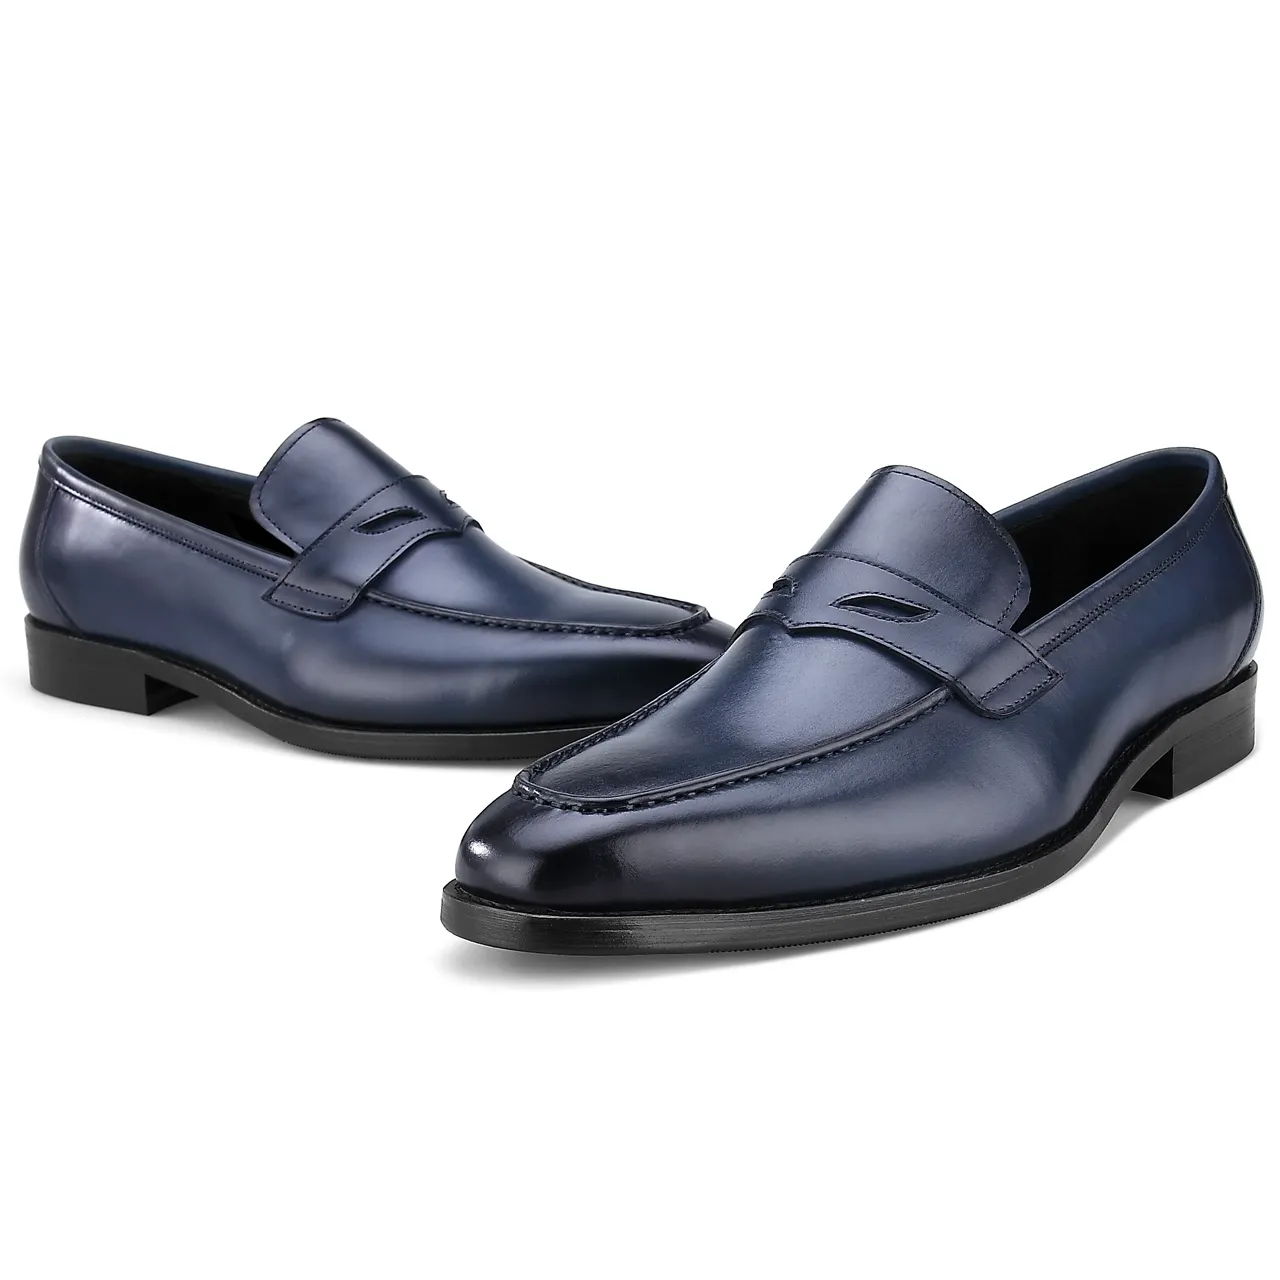 Blue Black Fashion Casual New Desgin Slip-on Genuine Leather Loafers Shoes Moccasins Shoes for Men